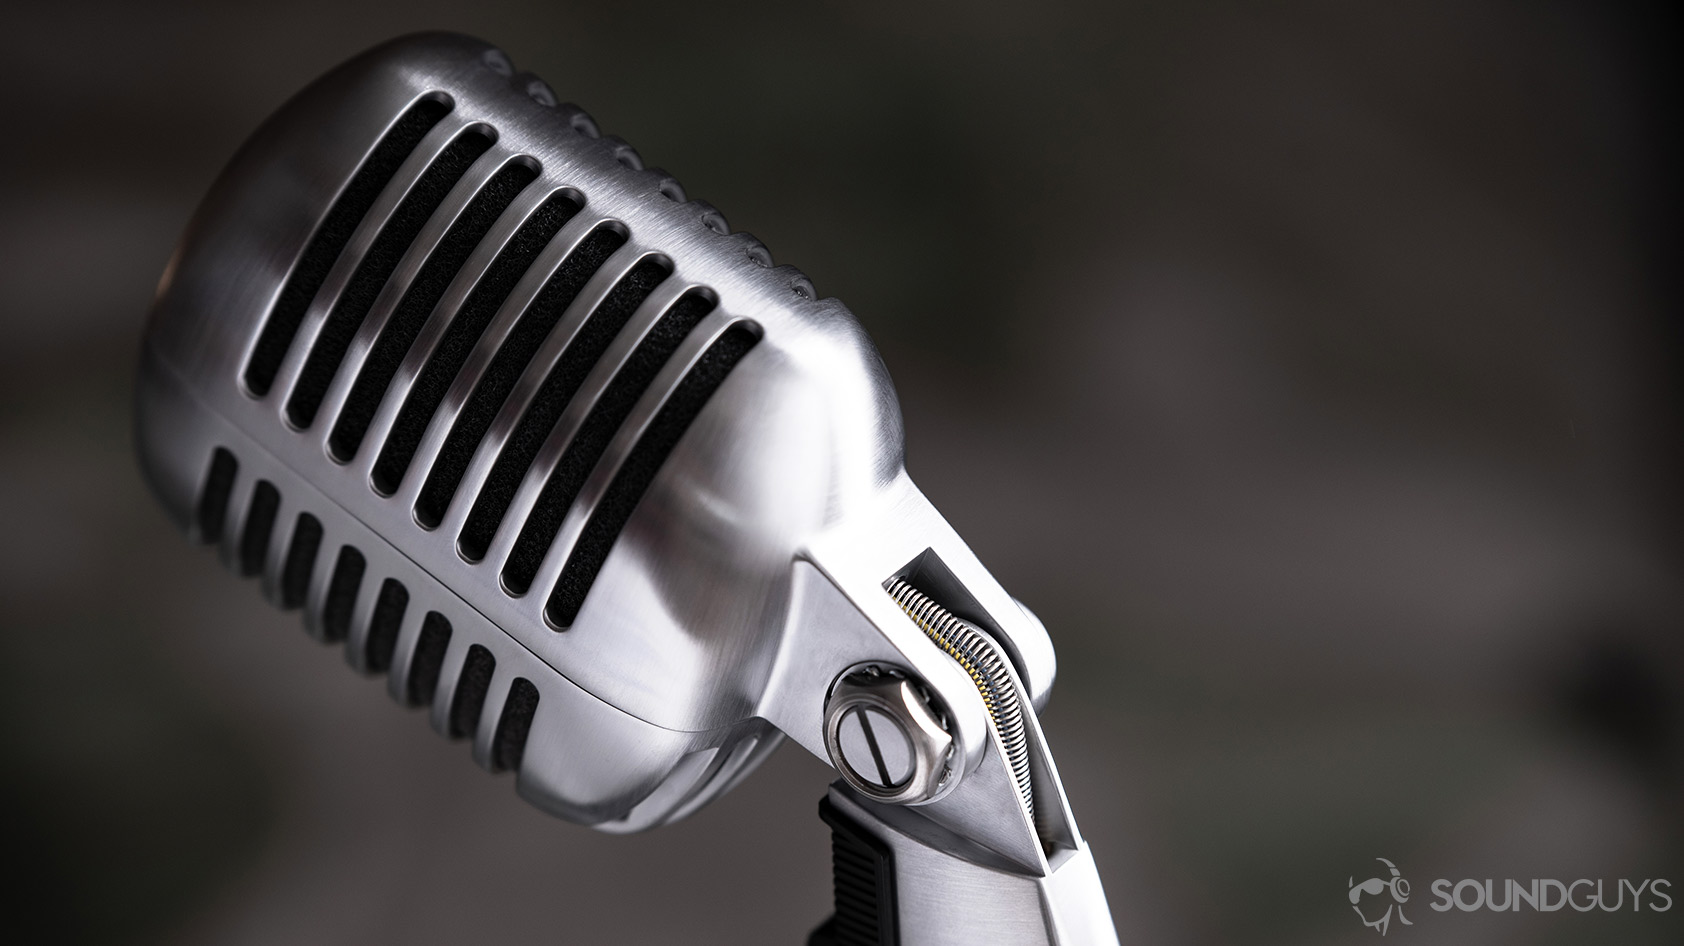 The Shure 55SH Series II being bent toward the front of the mic.